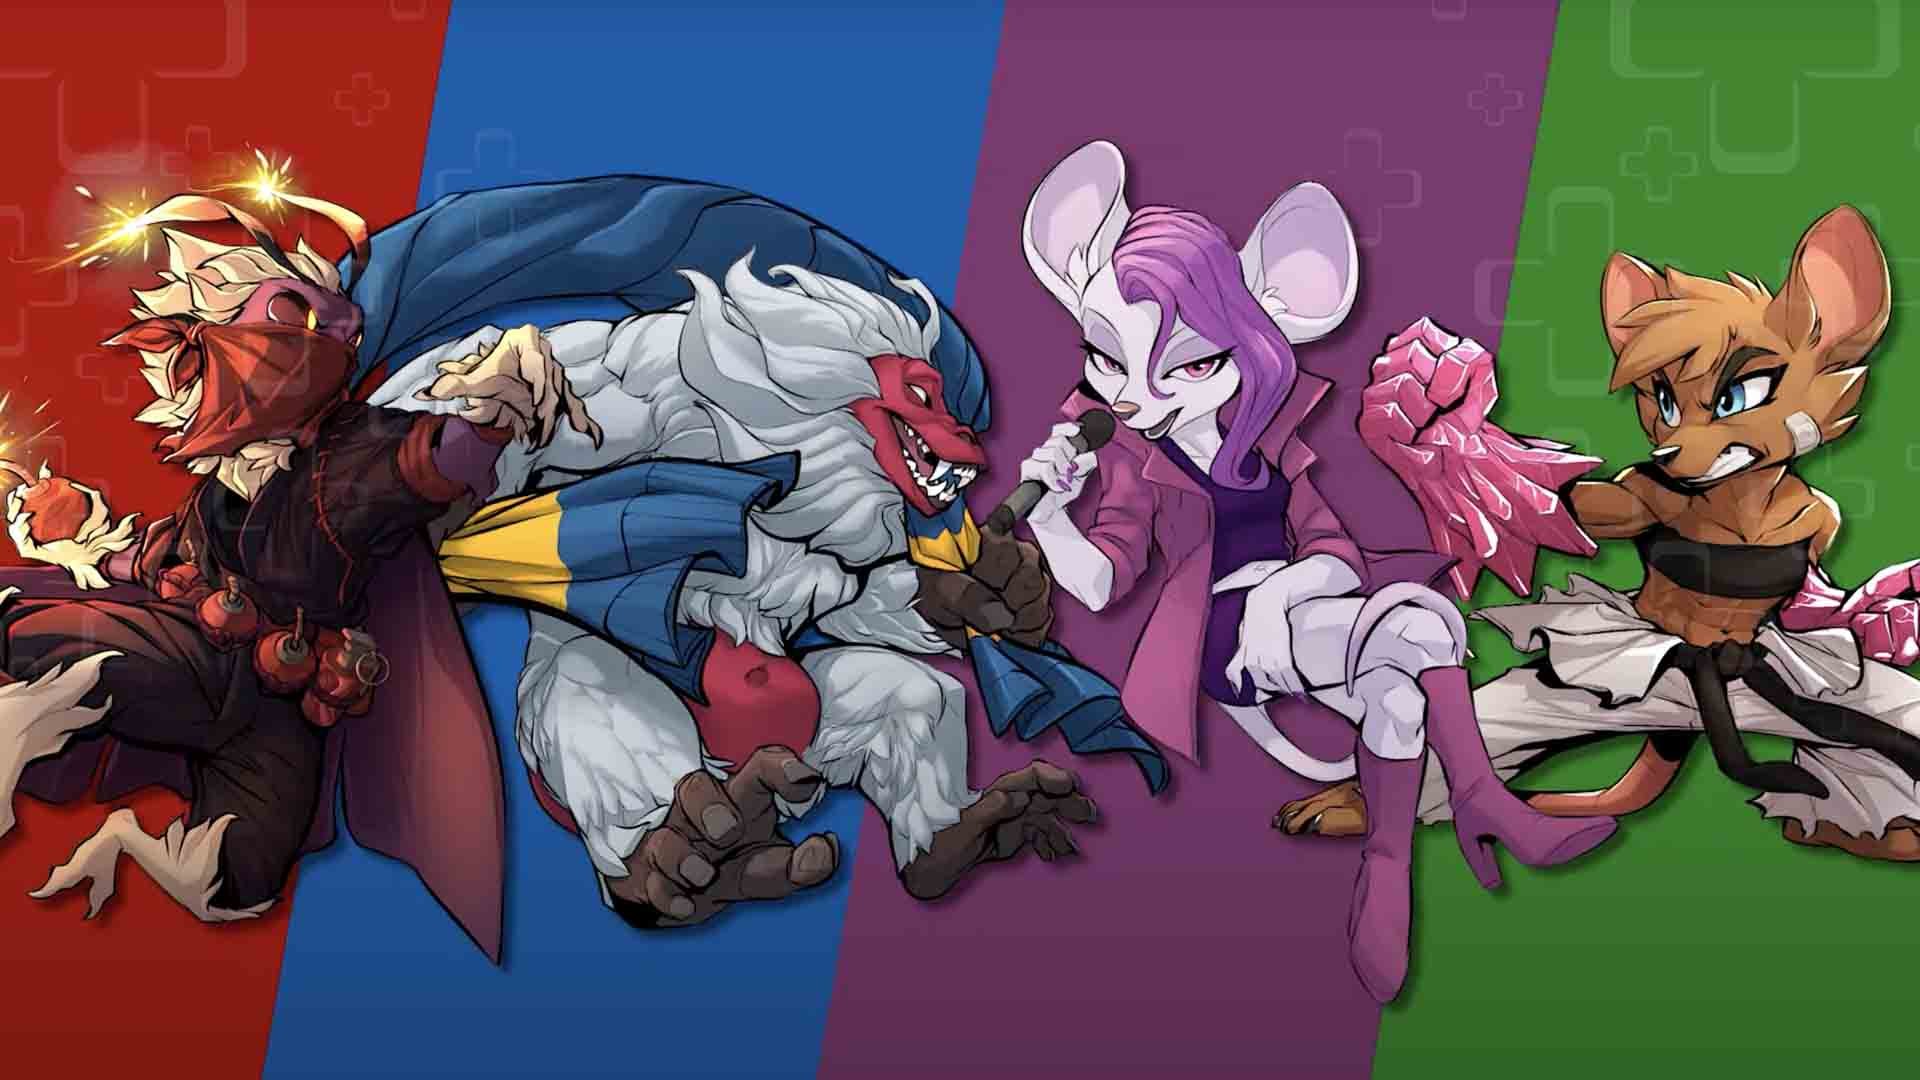 rivals of aether free download all dlc